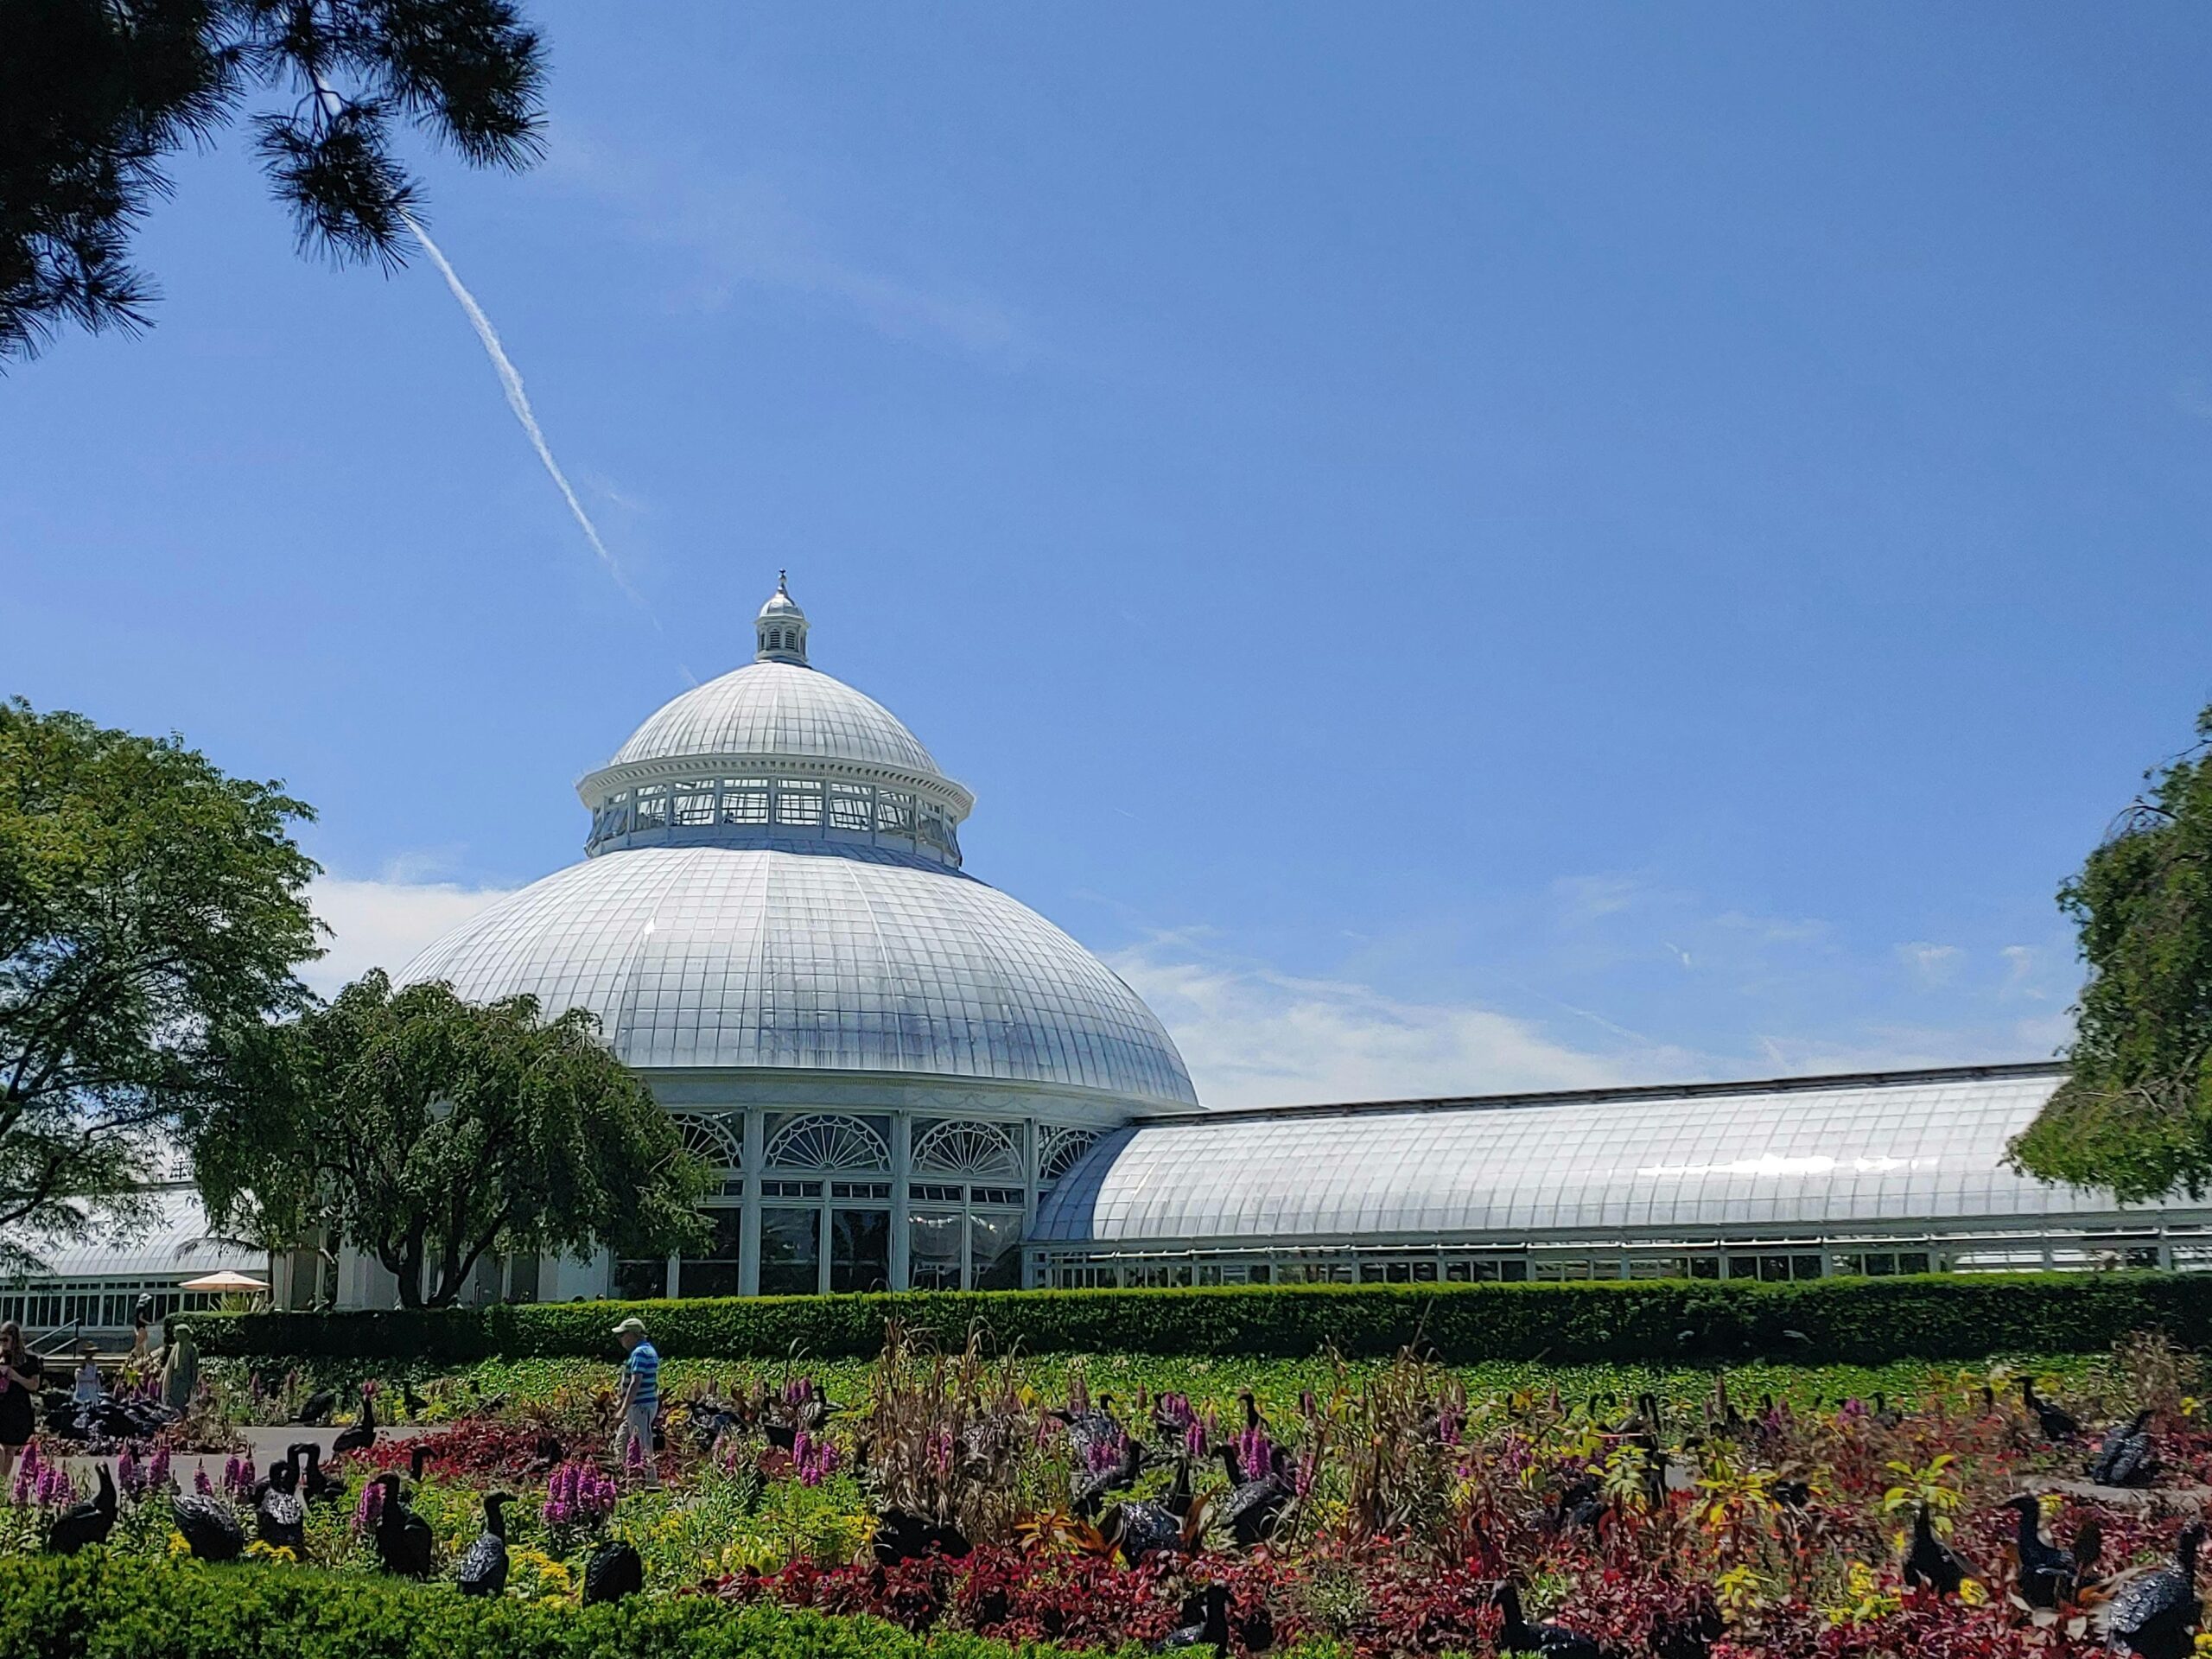 The New York Botanical Garden’s grounds with a greenhouse.